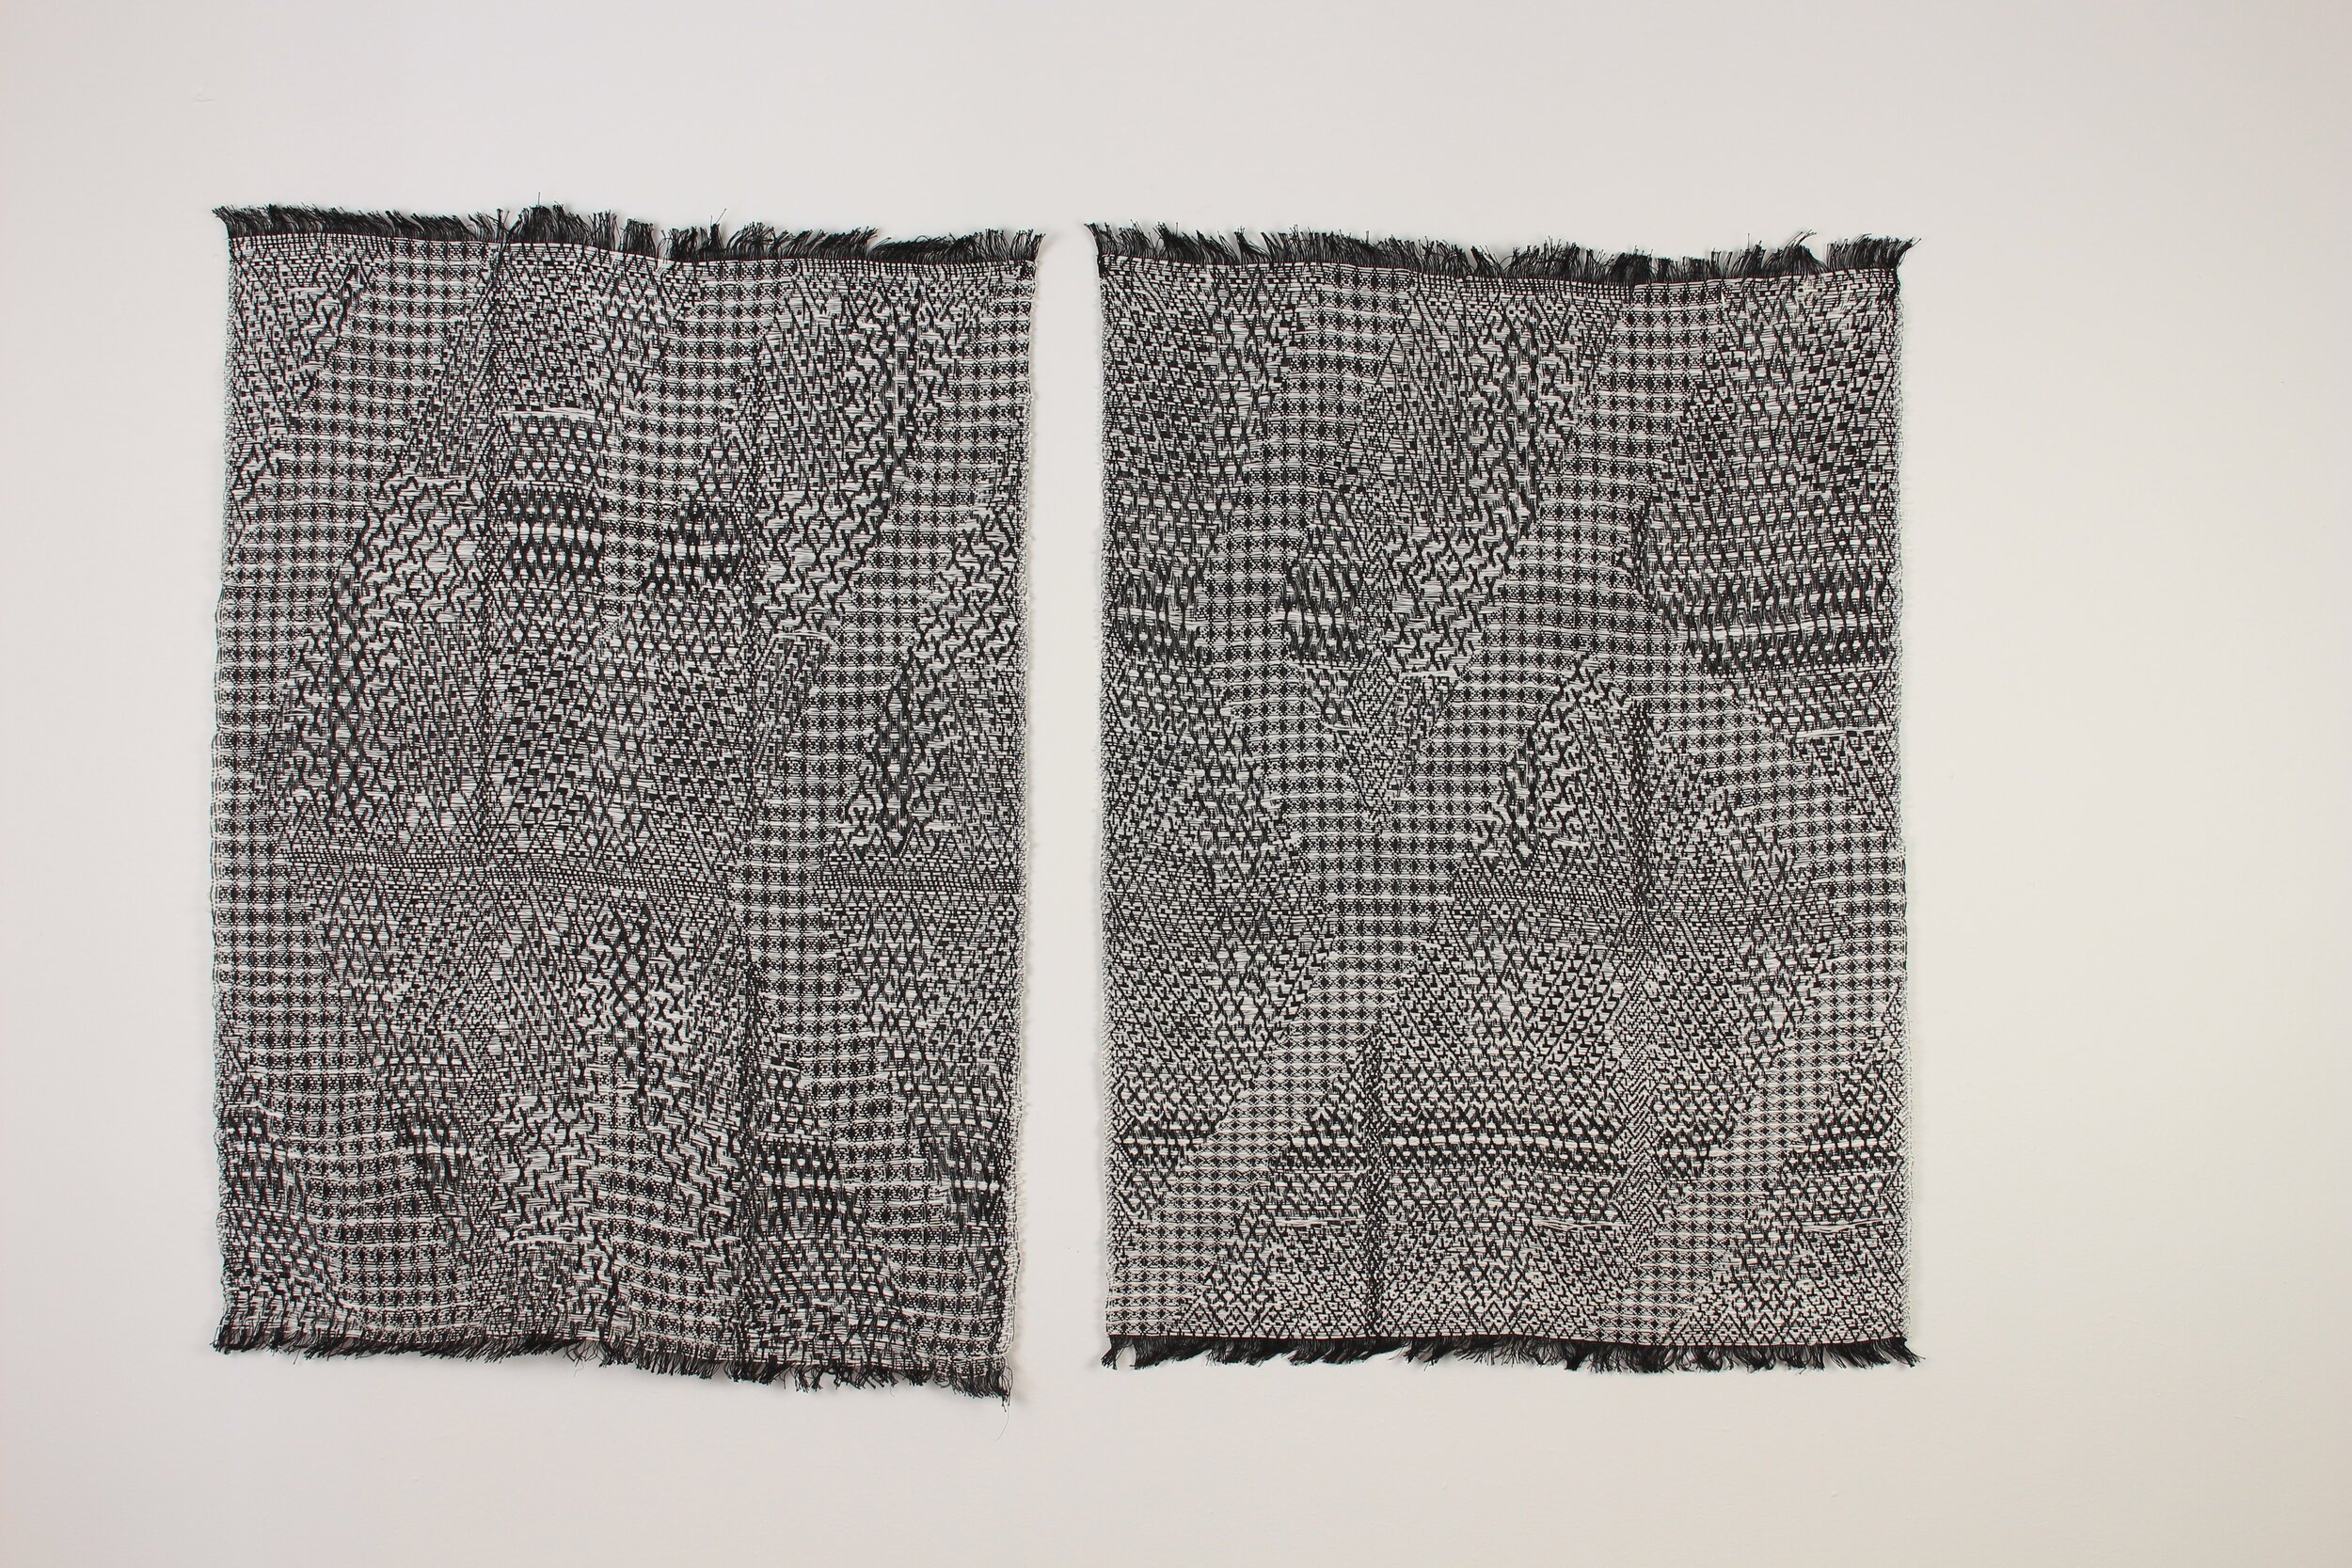 4. Samantha Haan, This because of that 1 and 2, paper yarn and cotton, 37 x 28 inches each, 2019-.jpeg